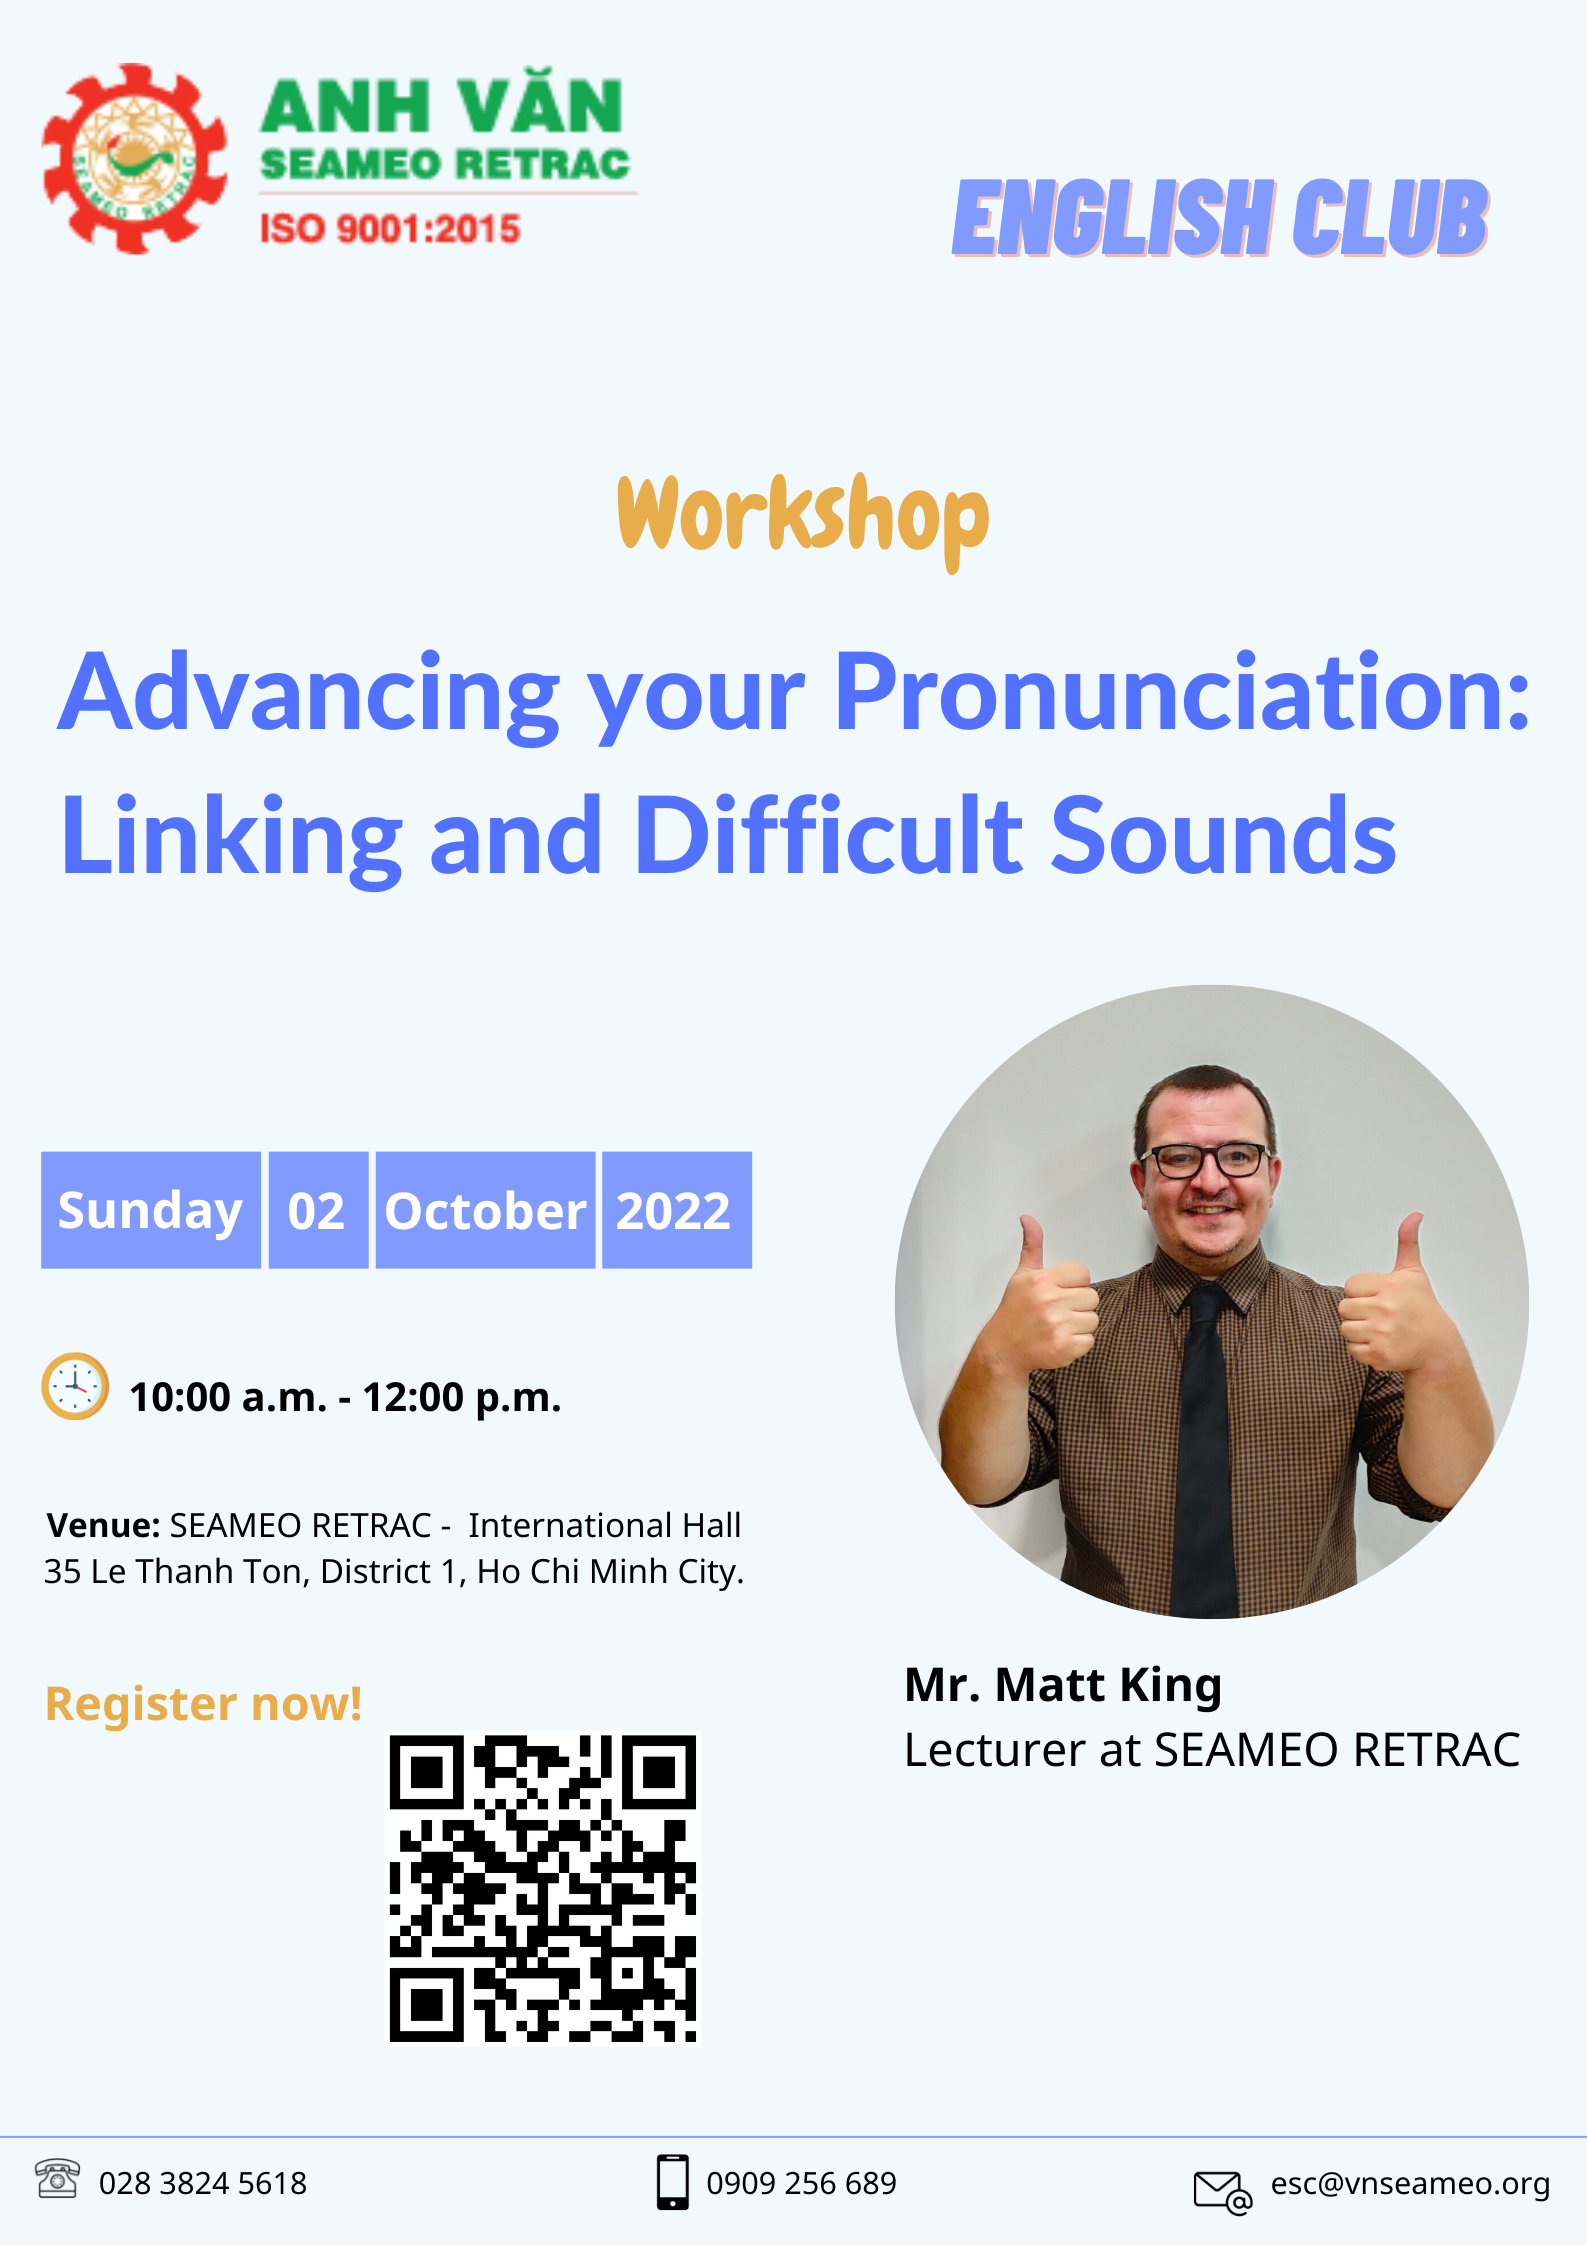 Workshop titled “Advancing your Pronunciation: Linking and Difficult Sounds”